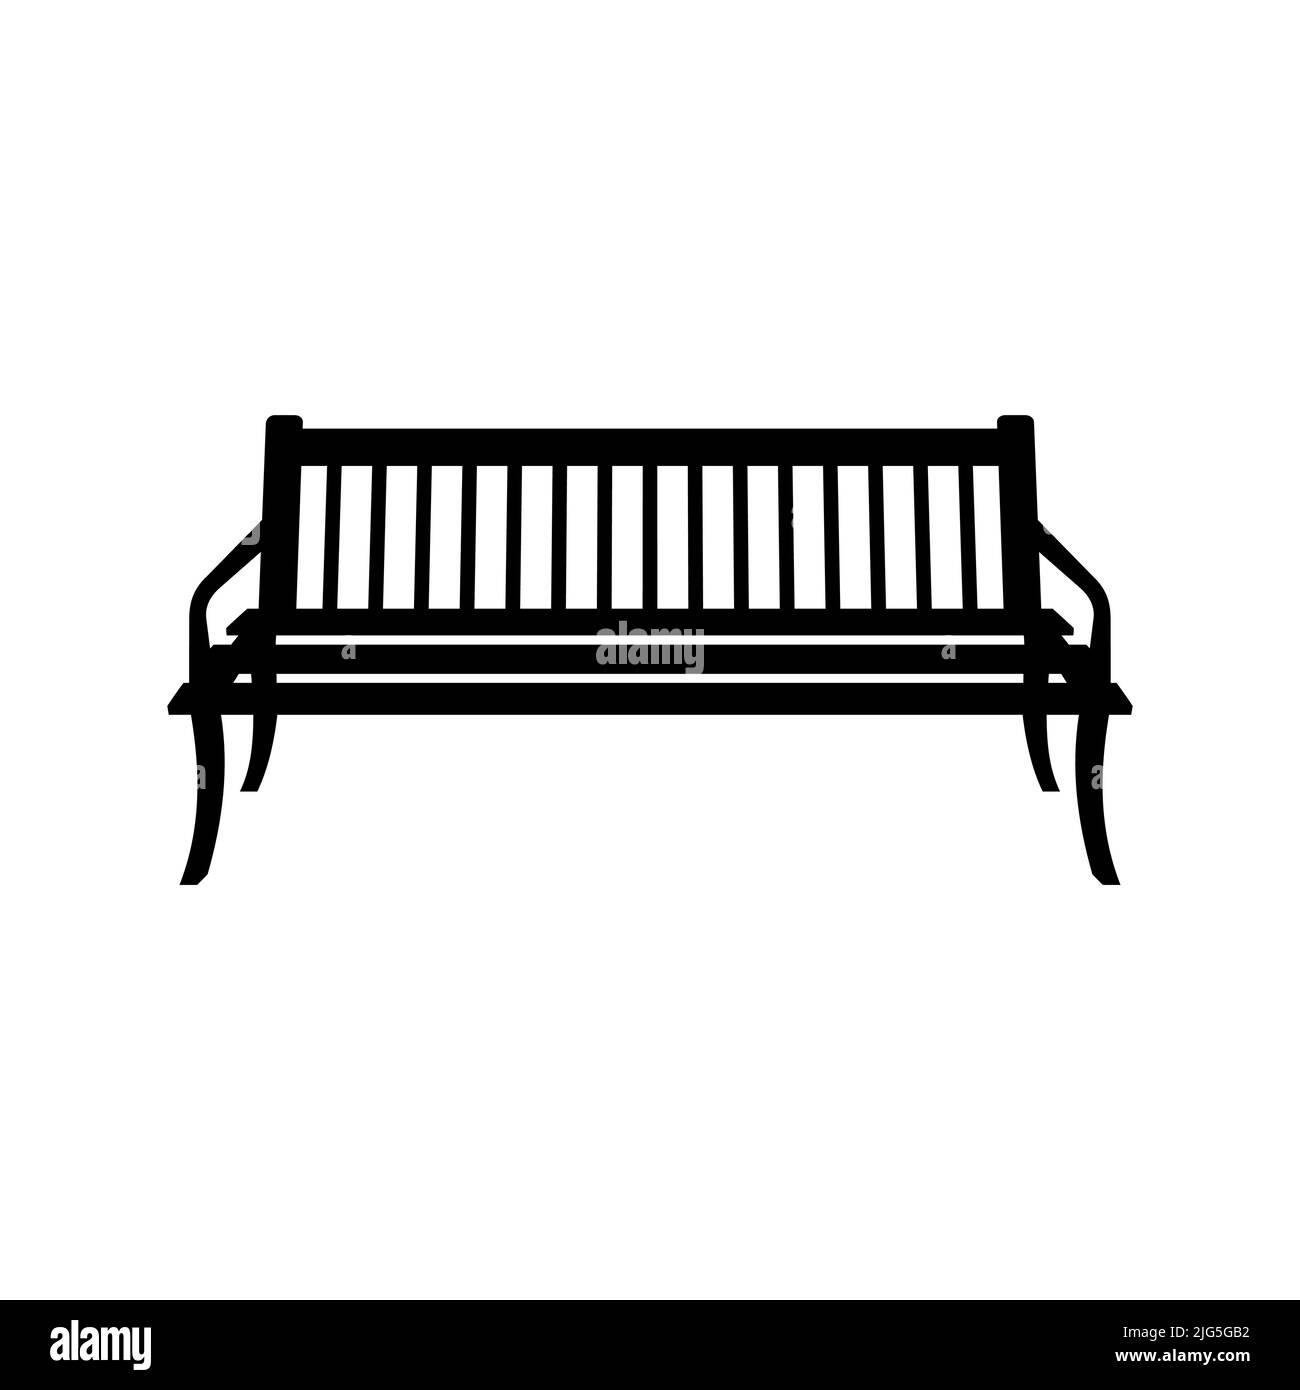 Garden bench, public park furniture design. Front view wooden bench with a backrest. Flat vector illustration isolated on white background. Stock Vector